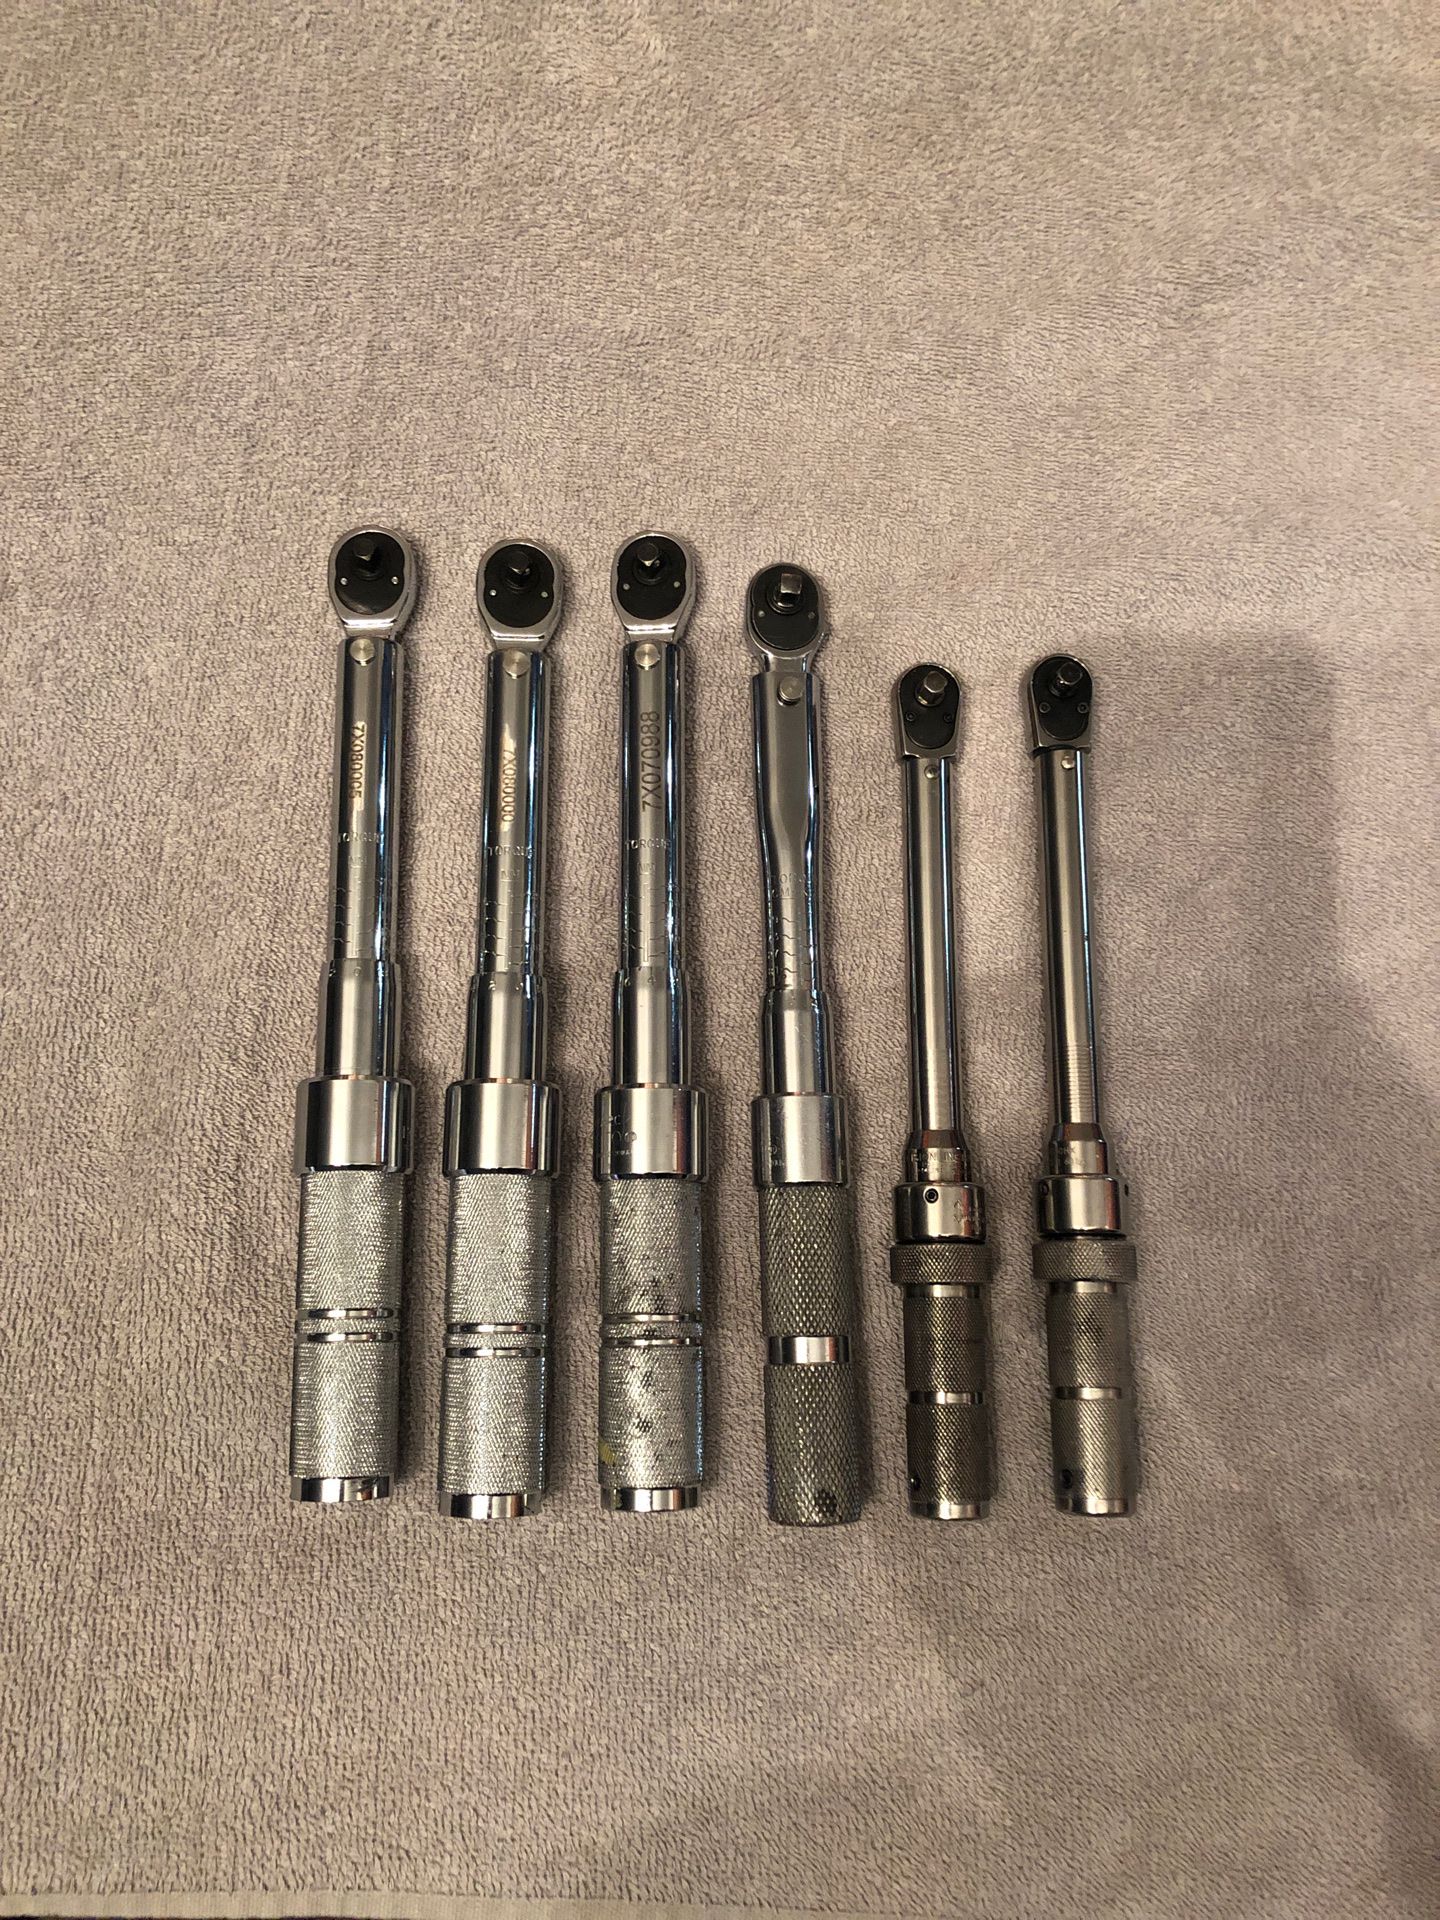 1/4 inch Torque Wrenches